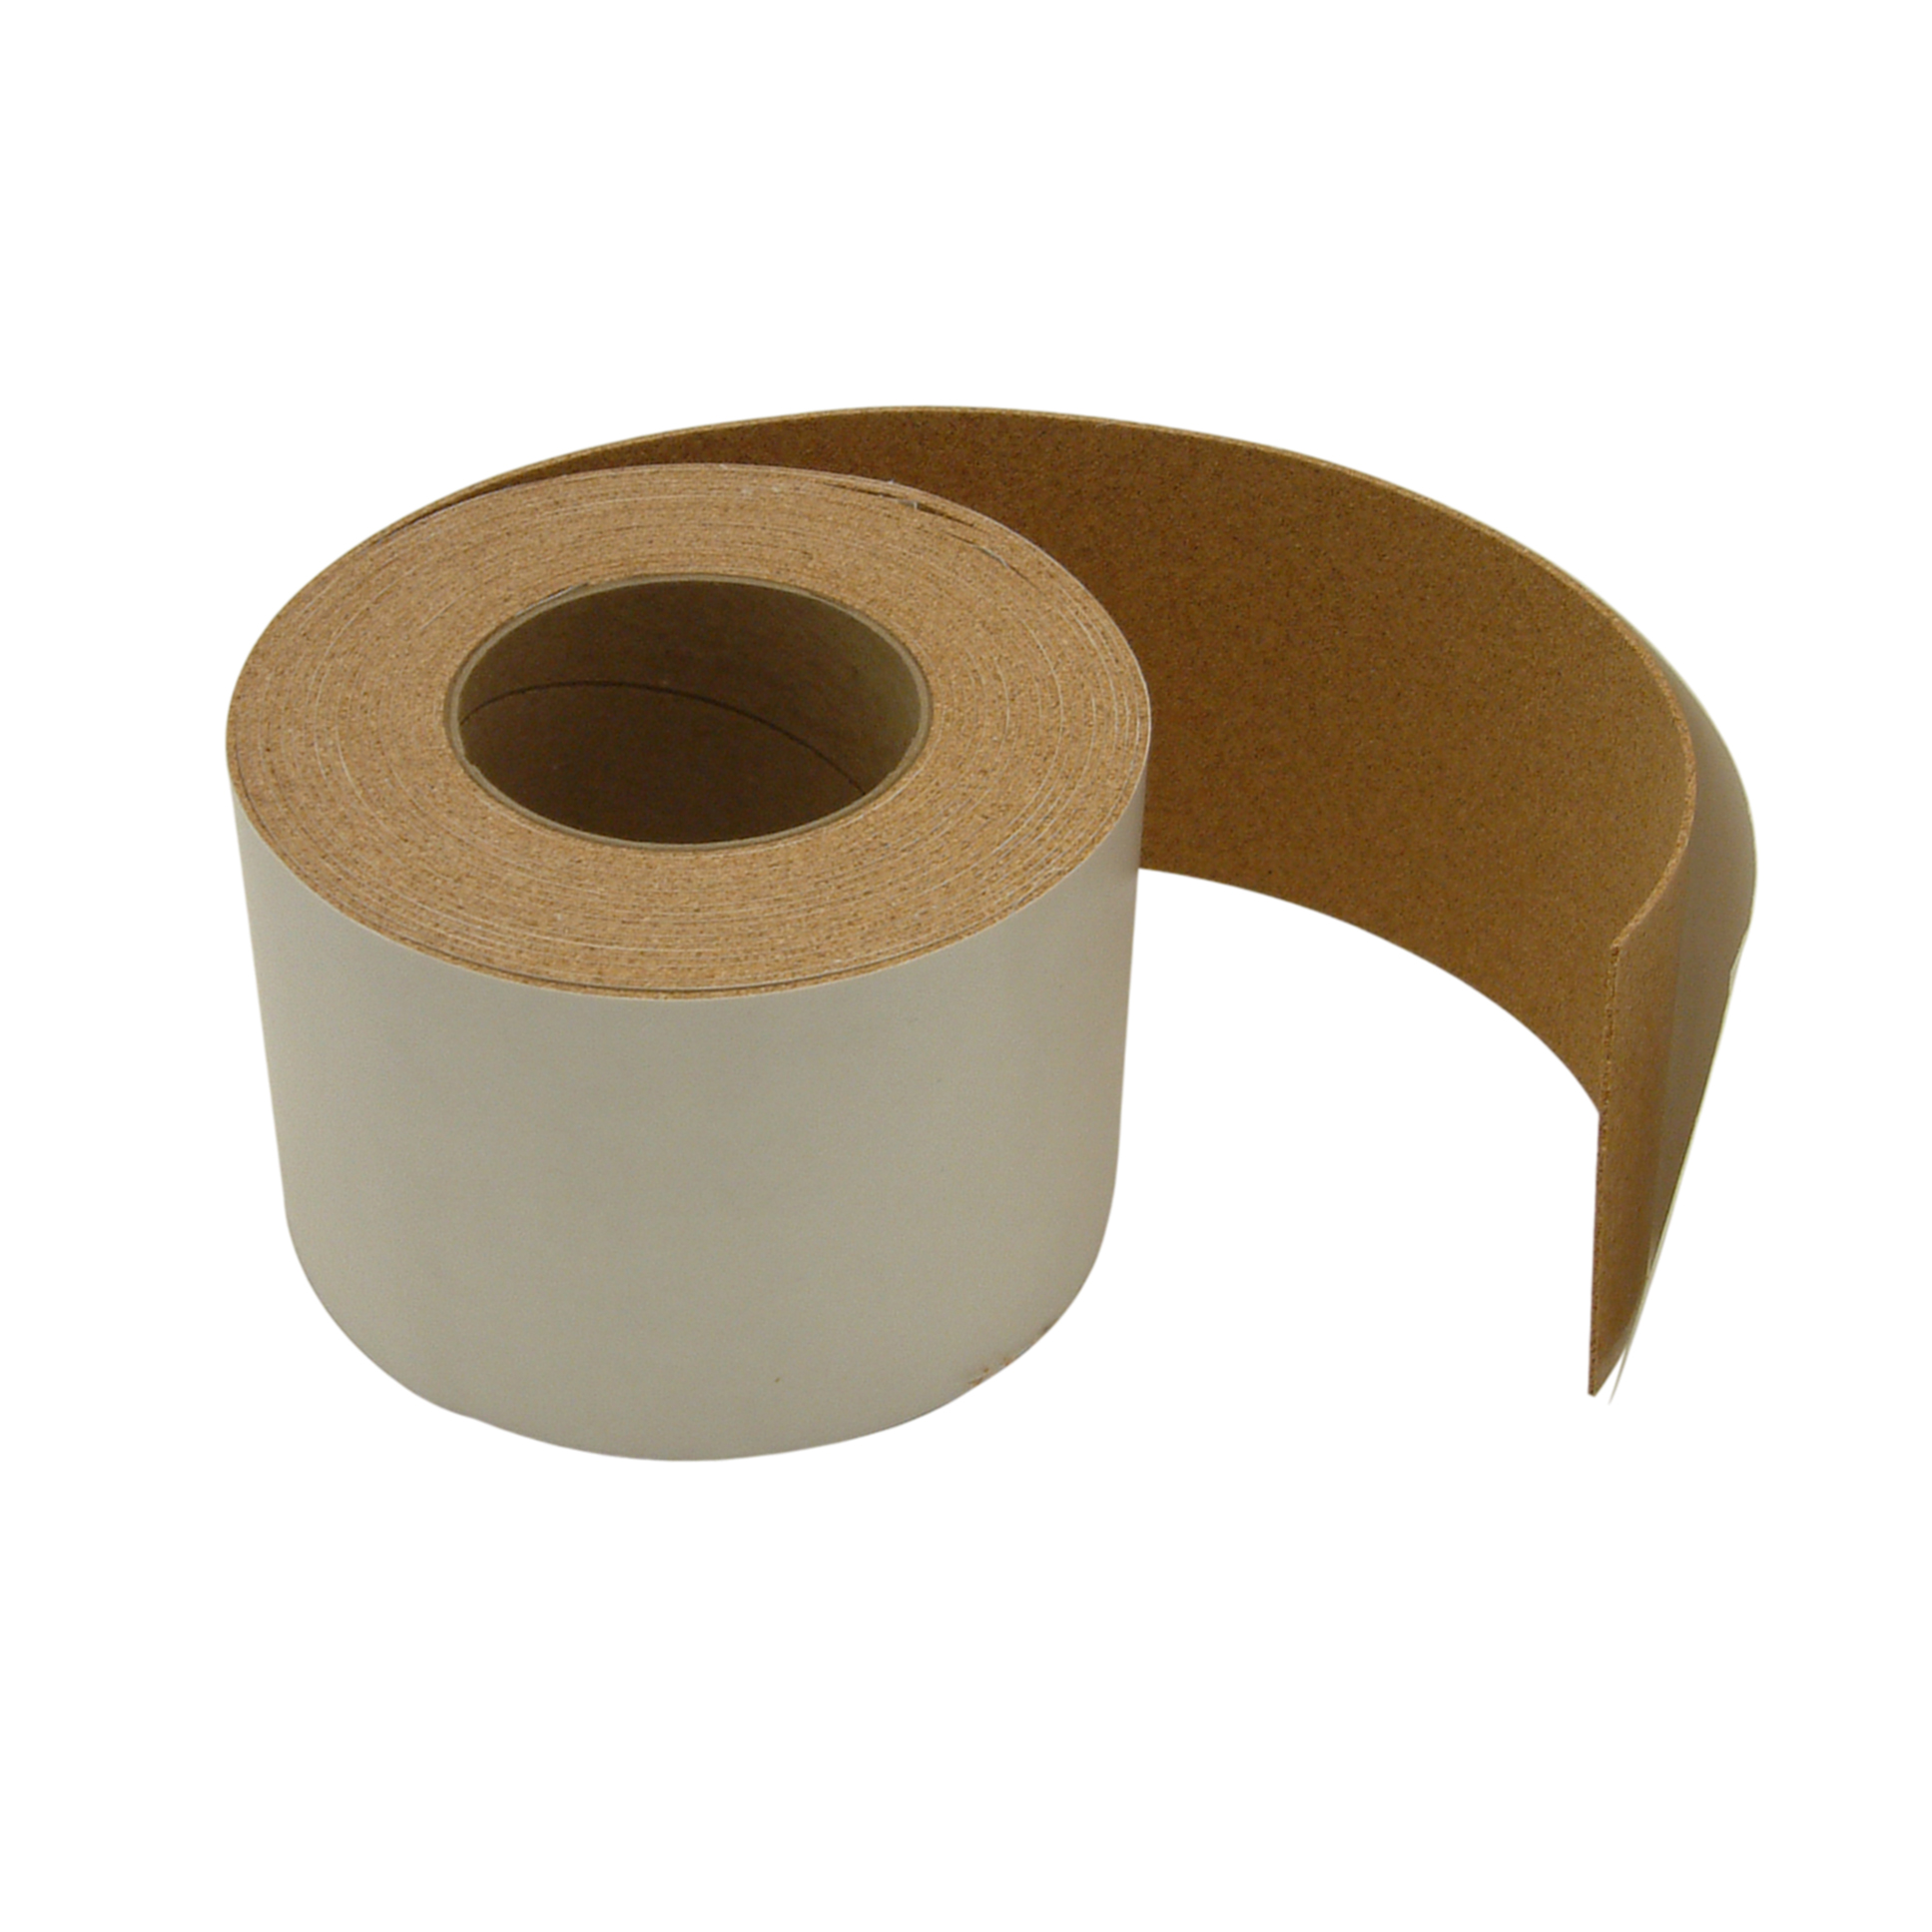 JVCC CORK-1 Adhesive-Backed Cork Tape [1/16&quot; thick cork]